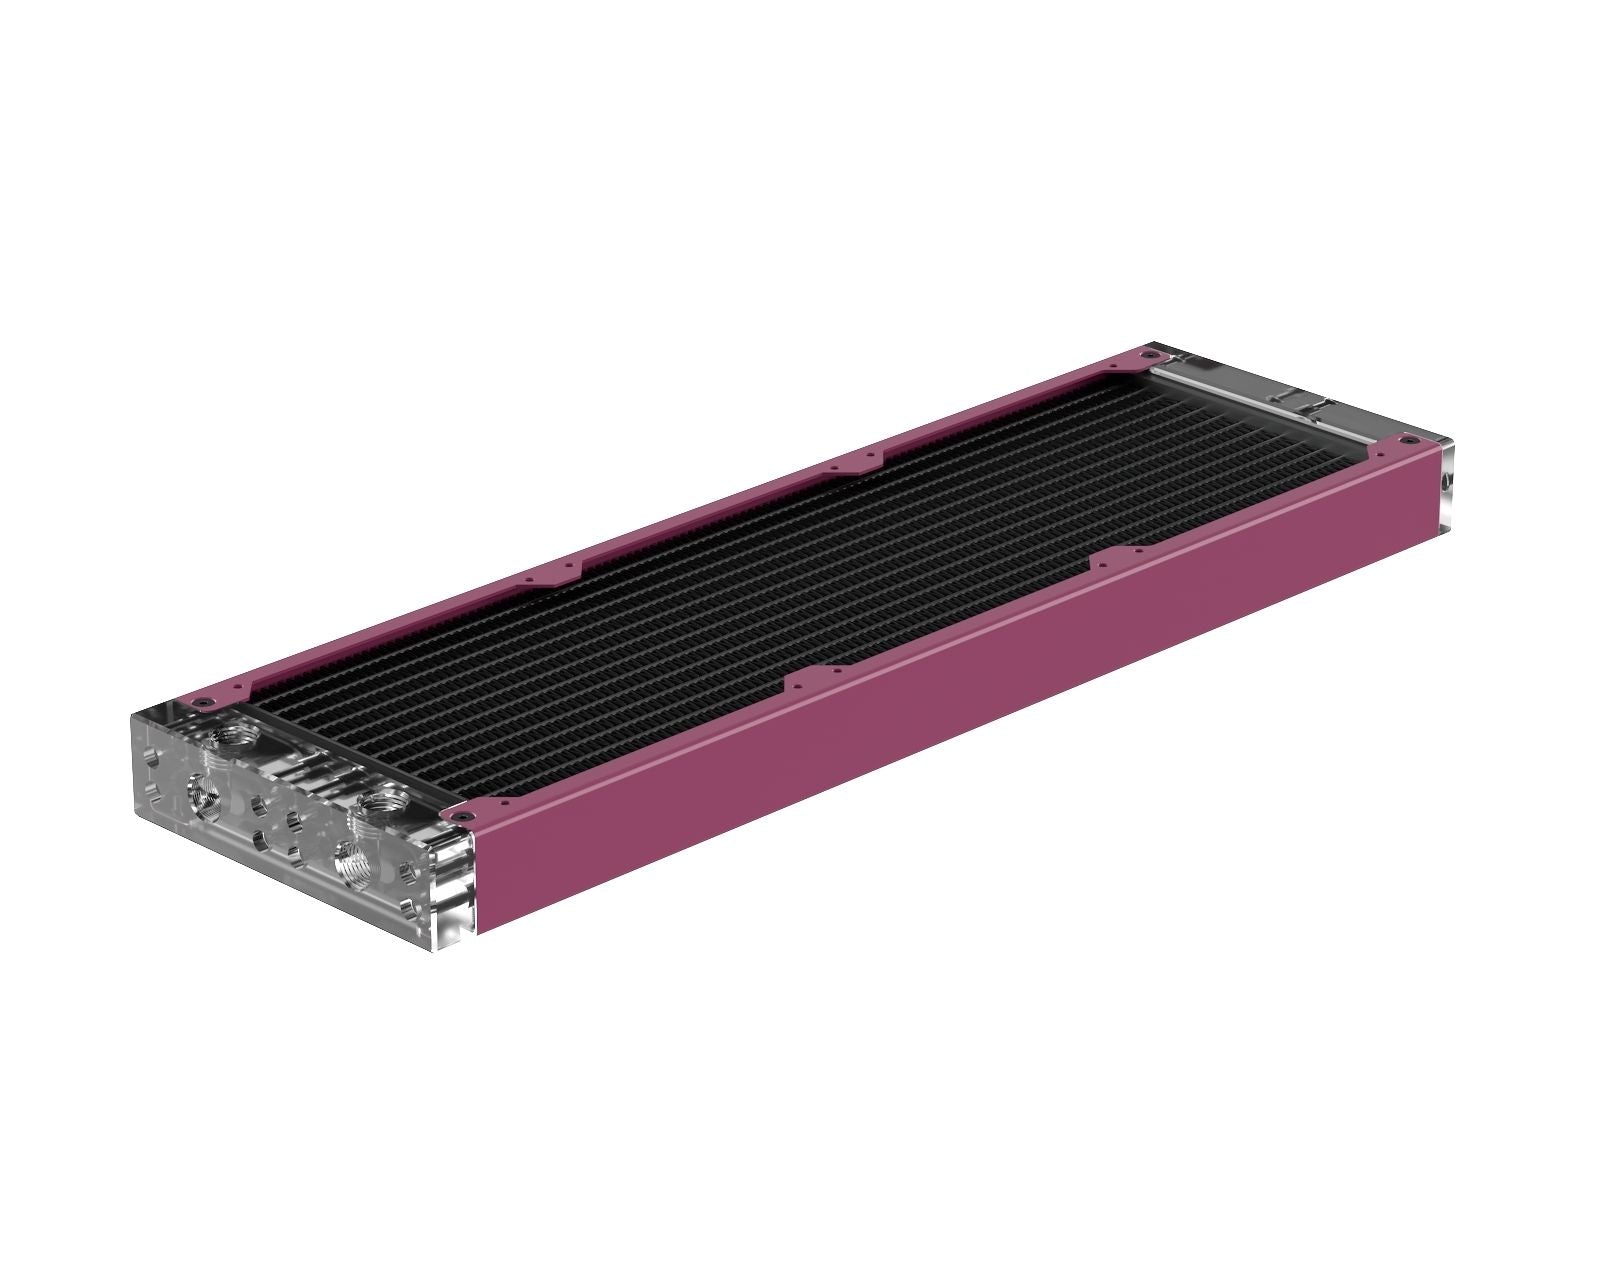 PrimoChill 360SL (30mm) EXIMO Modular Radiator, Clear Acrylic, 3x120mm, Triple Fan (R-SL-A36) Available in 20+ Colors, Assembled in USA and Custom Watercooling Loop Ready - Magenta